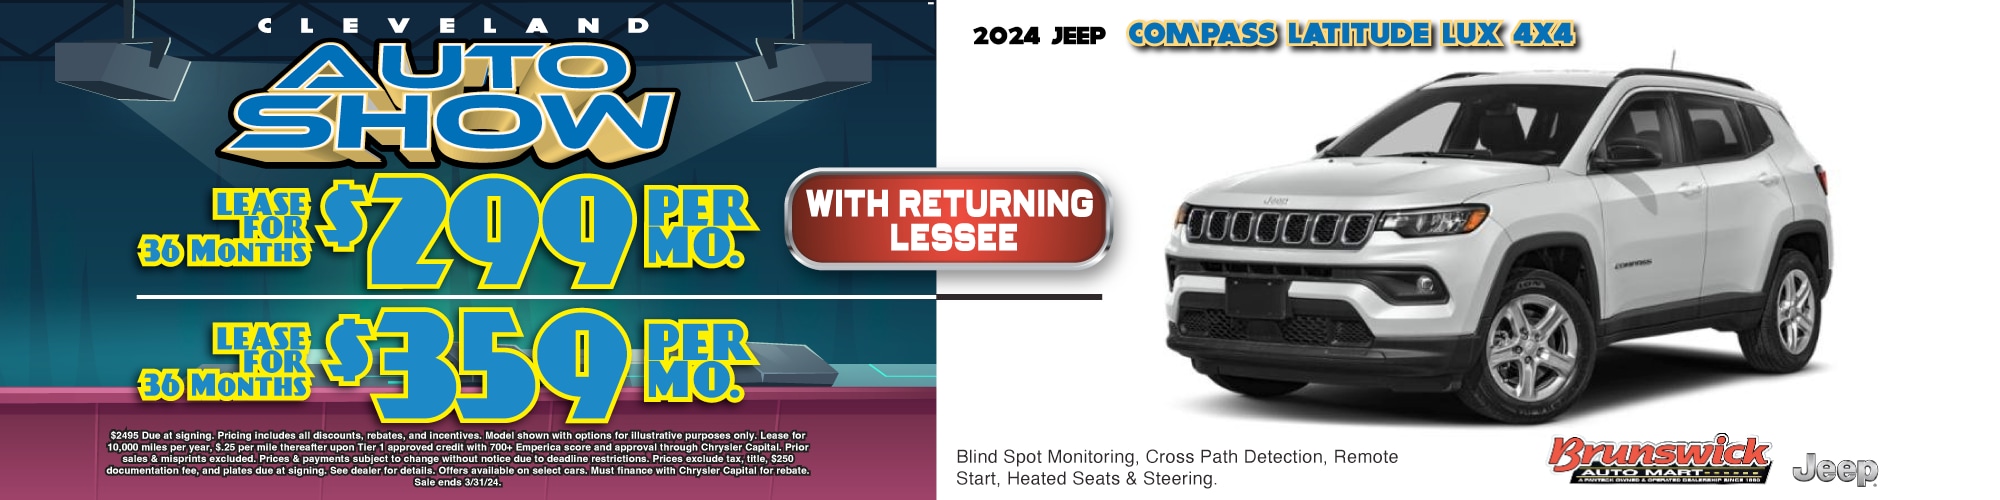 2024 Jeep Compass 359/month Lease Special Brunswick Auto Mart